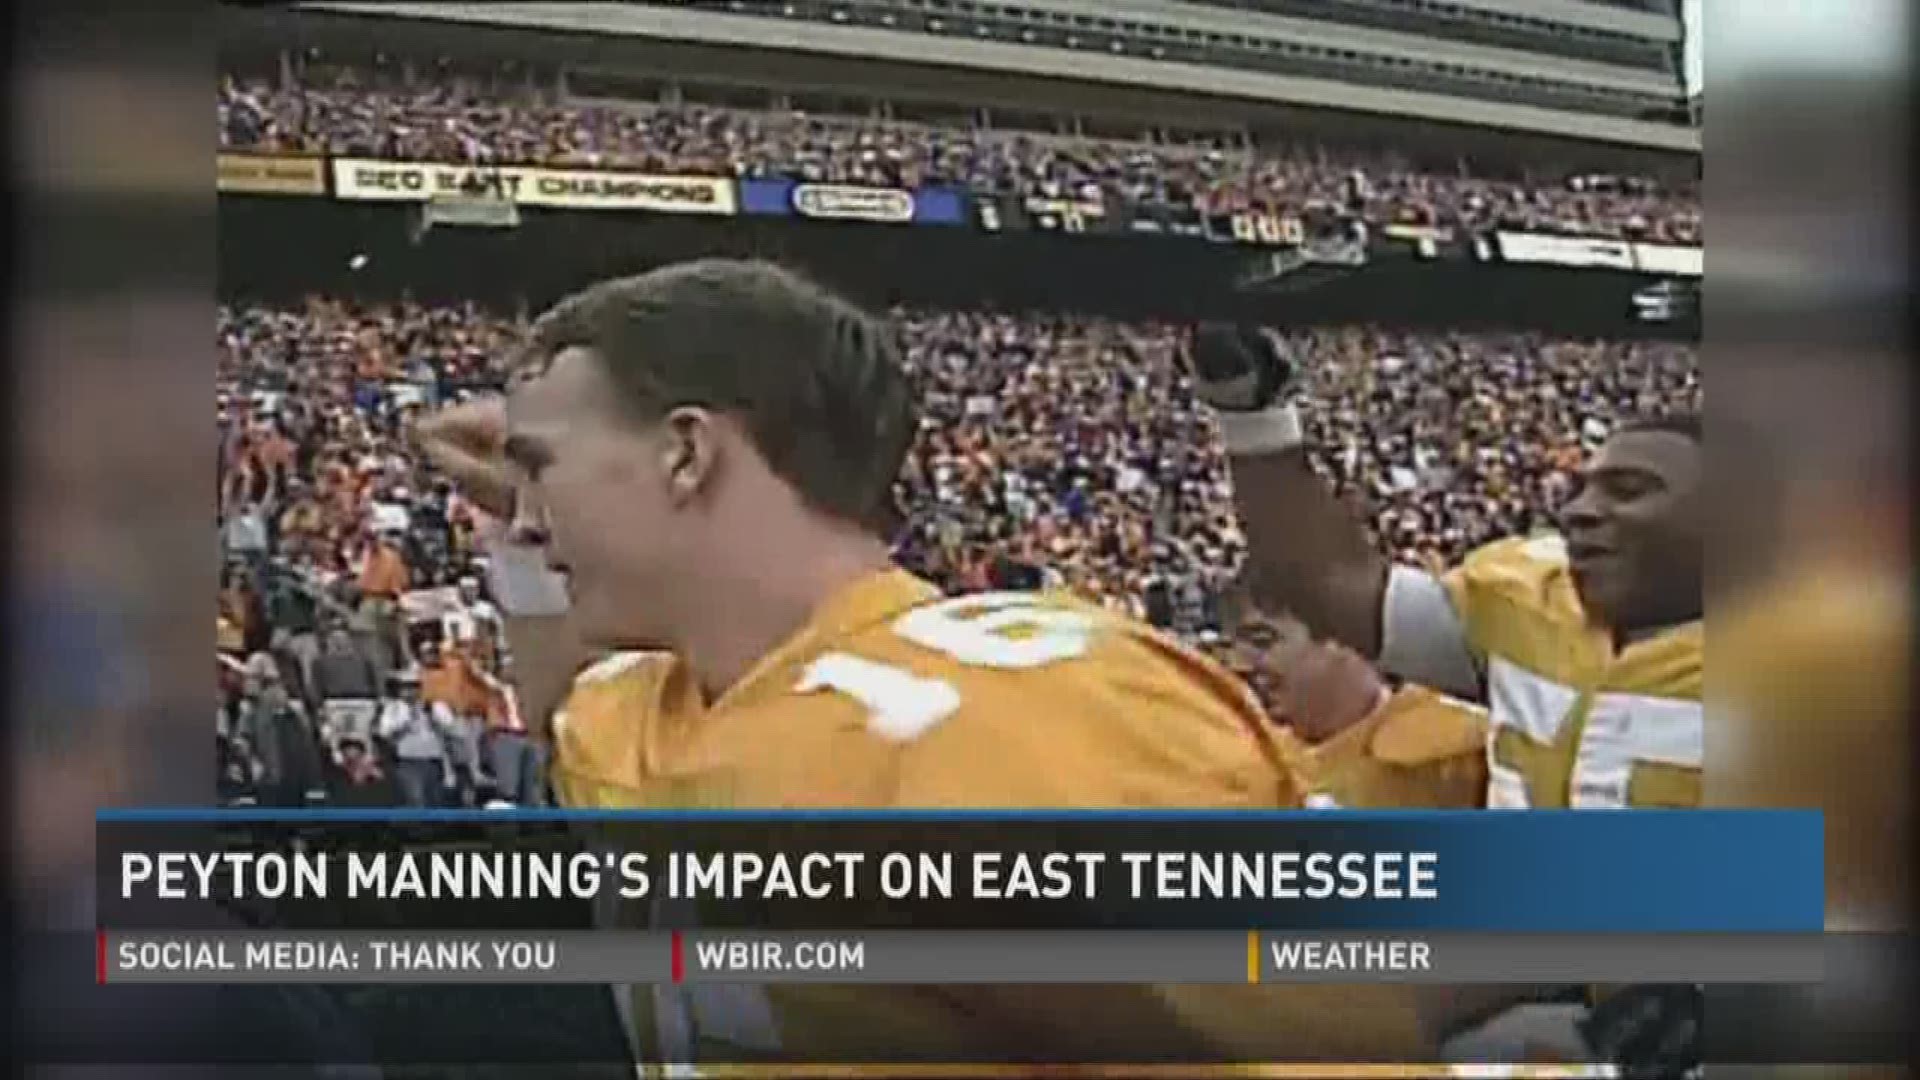 10News reporter Brittany Bade takes a look back on Manning's impact in the East Tennessee area.